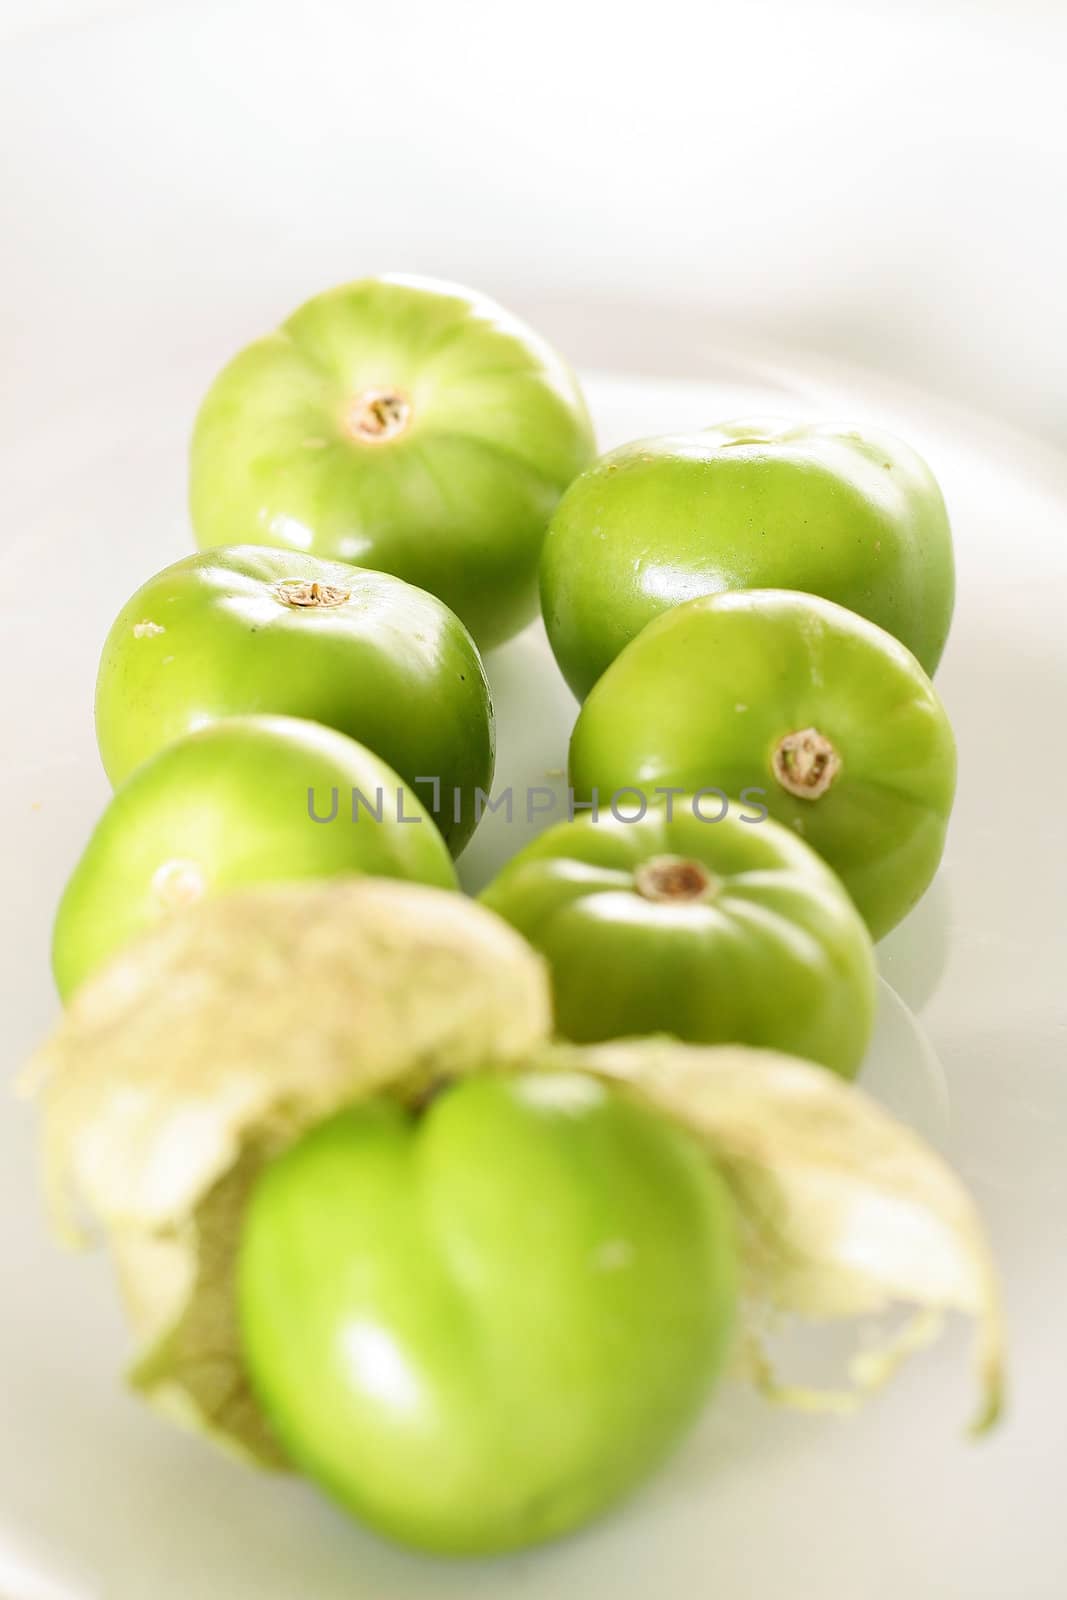 tomatillos on white vertical upclose